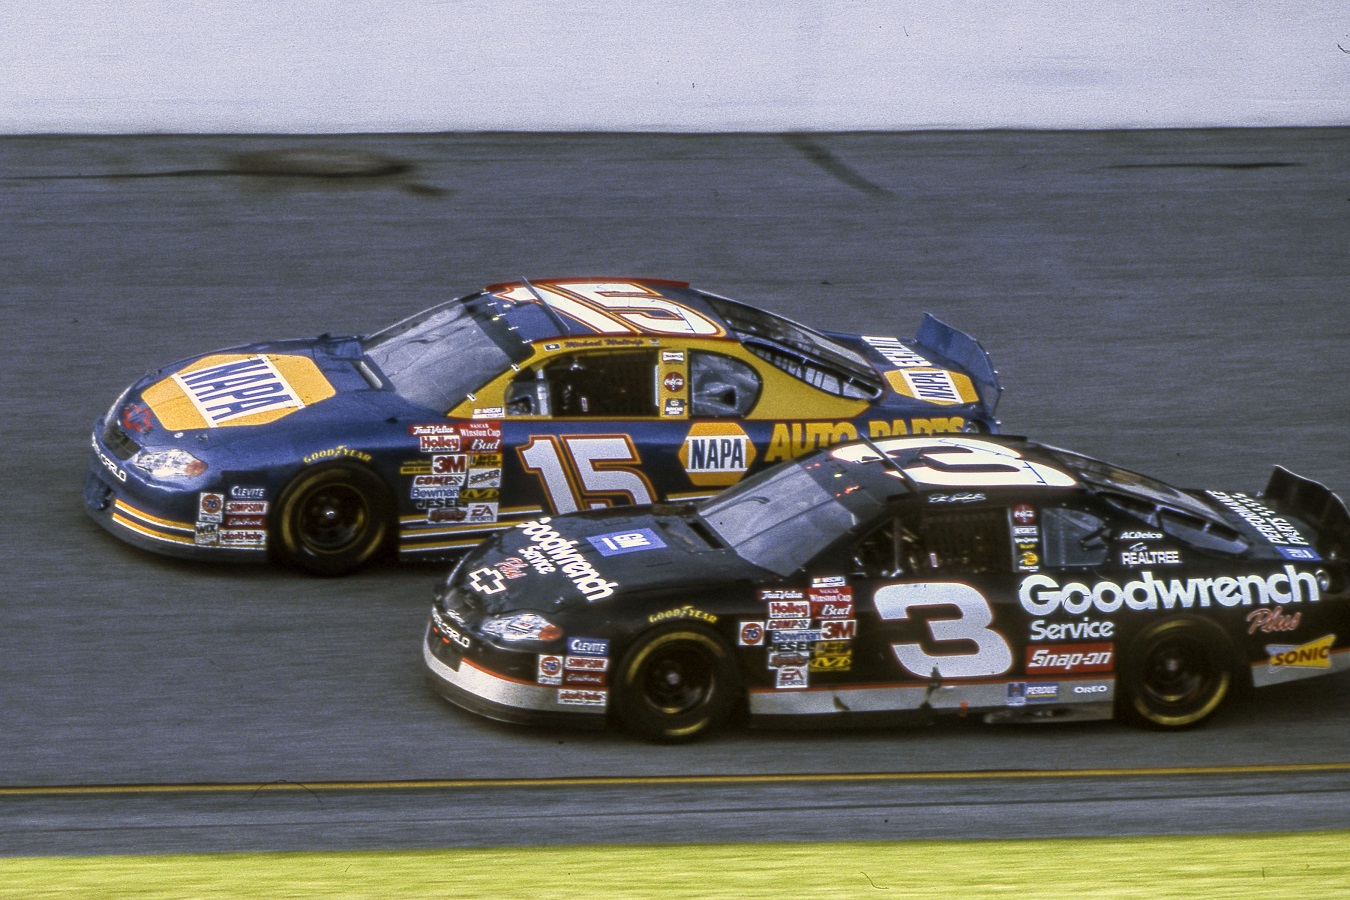 Michael Waltrip and Dale Earnhardt at the 2001 Daytona 500